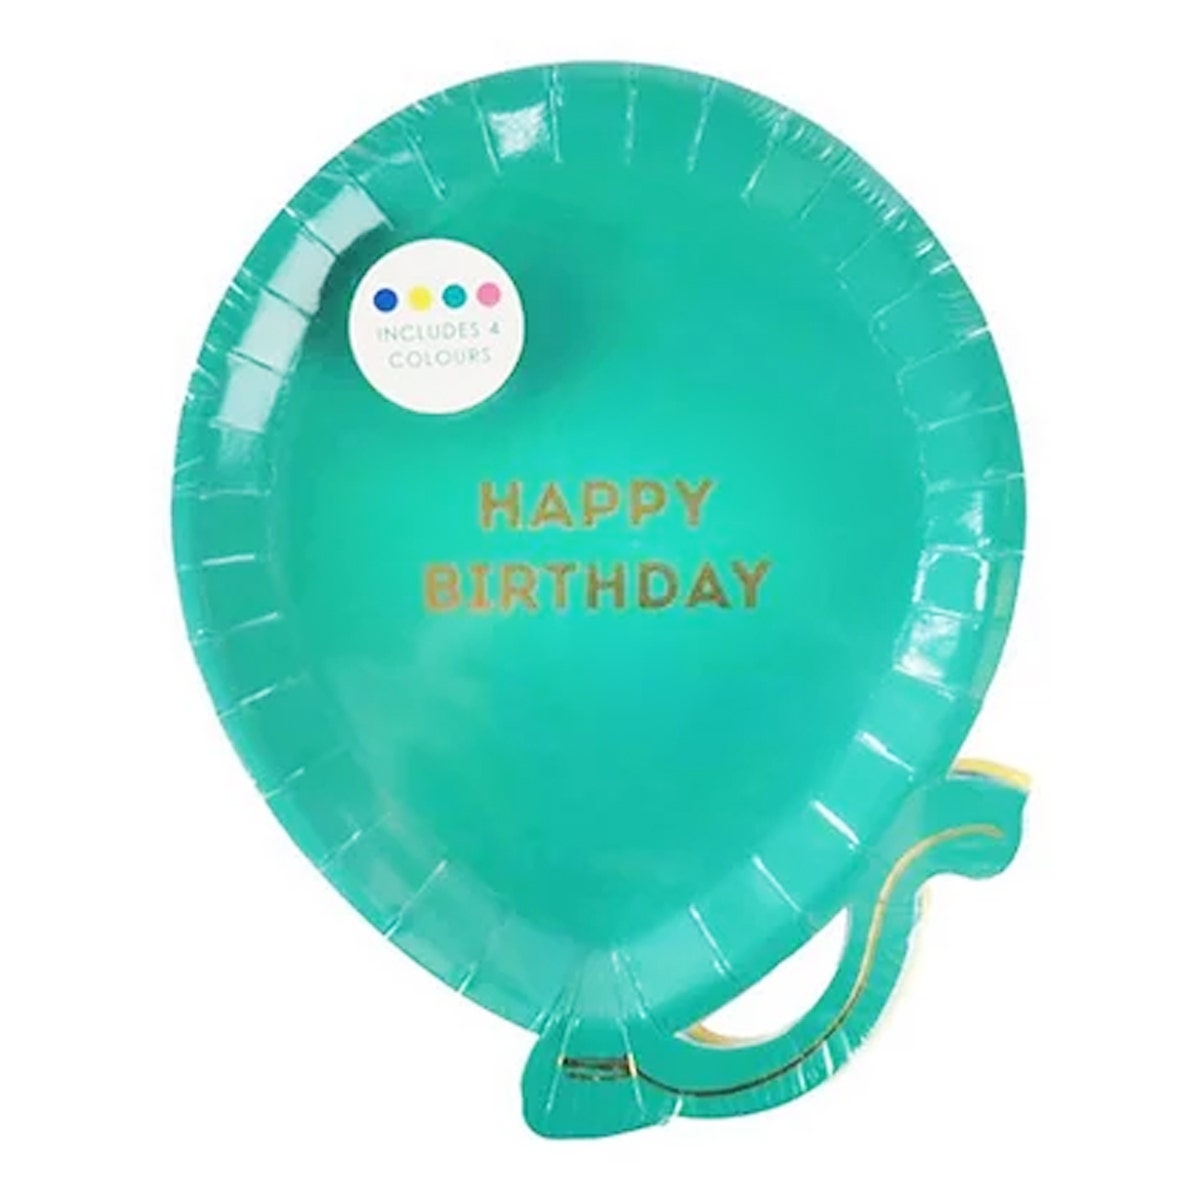 12pk Balloon-Shaped 7” Birthday Party Paper Plates – 4 Colors